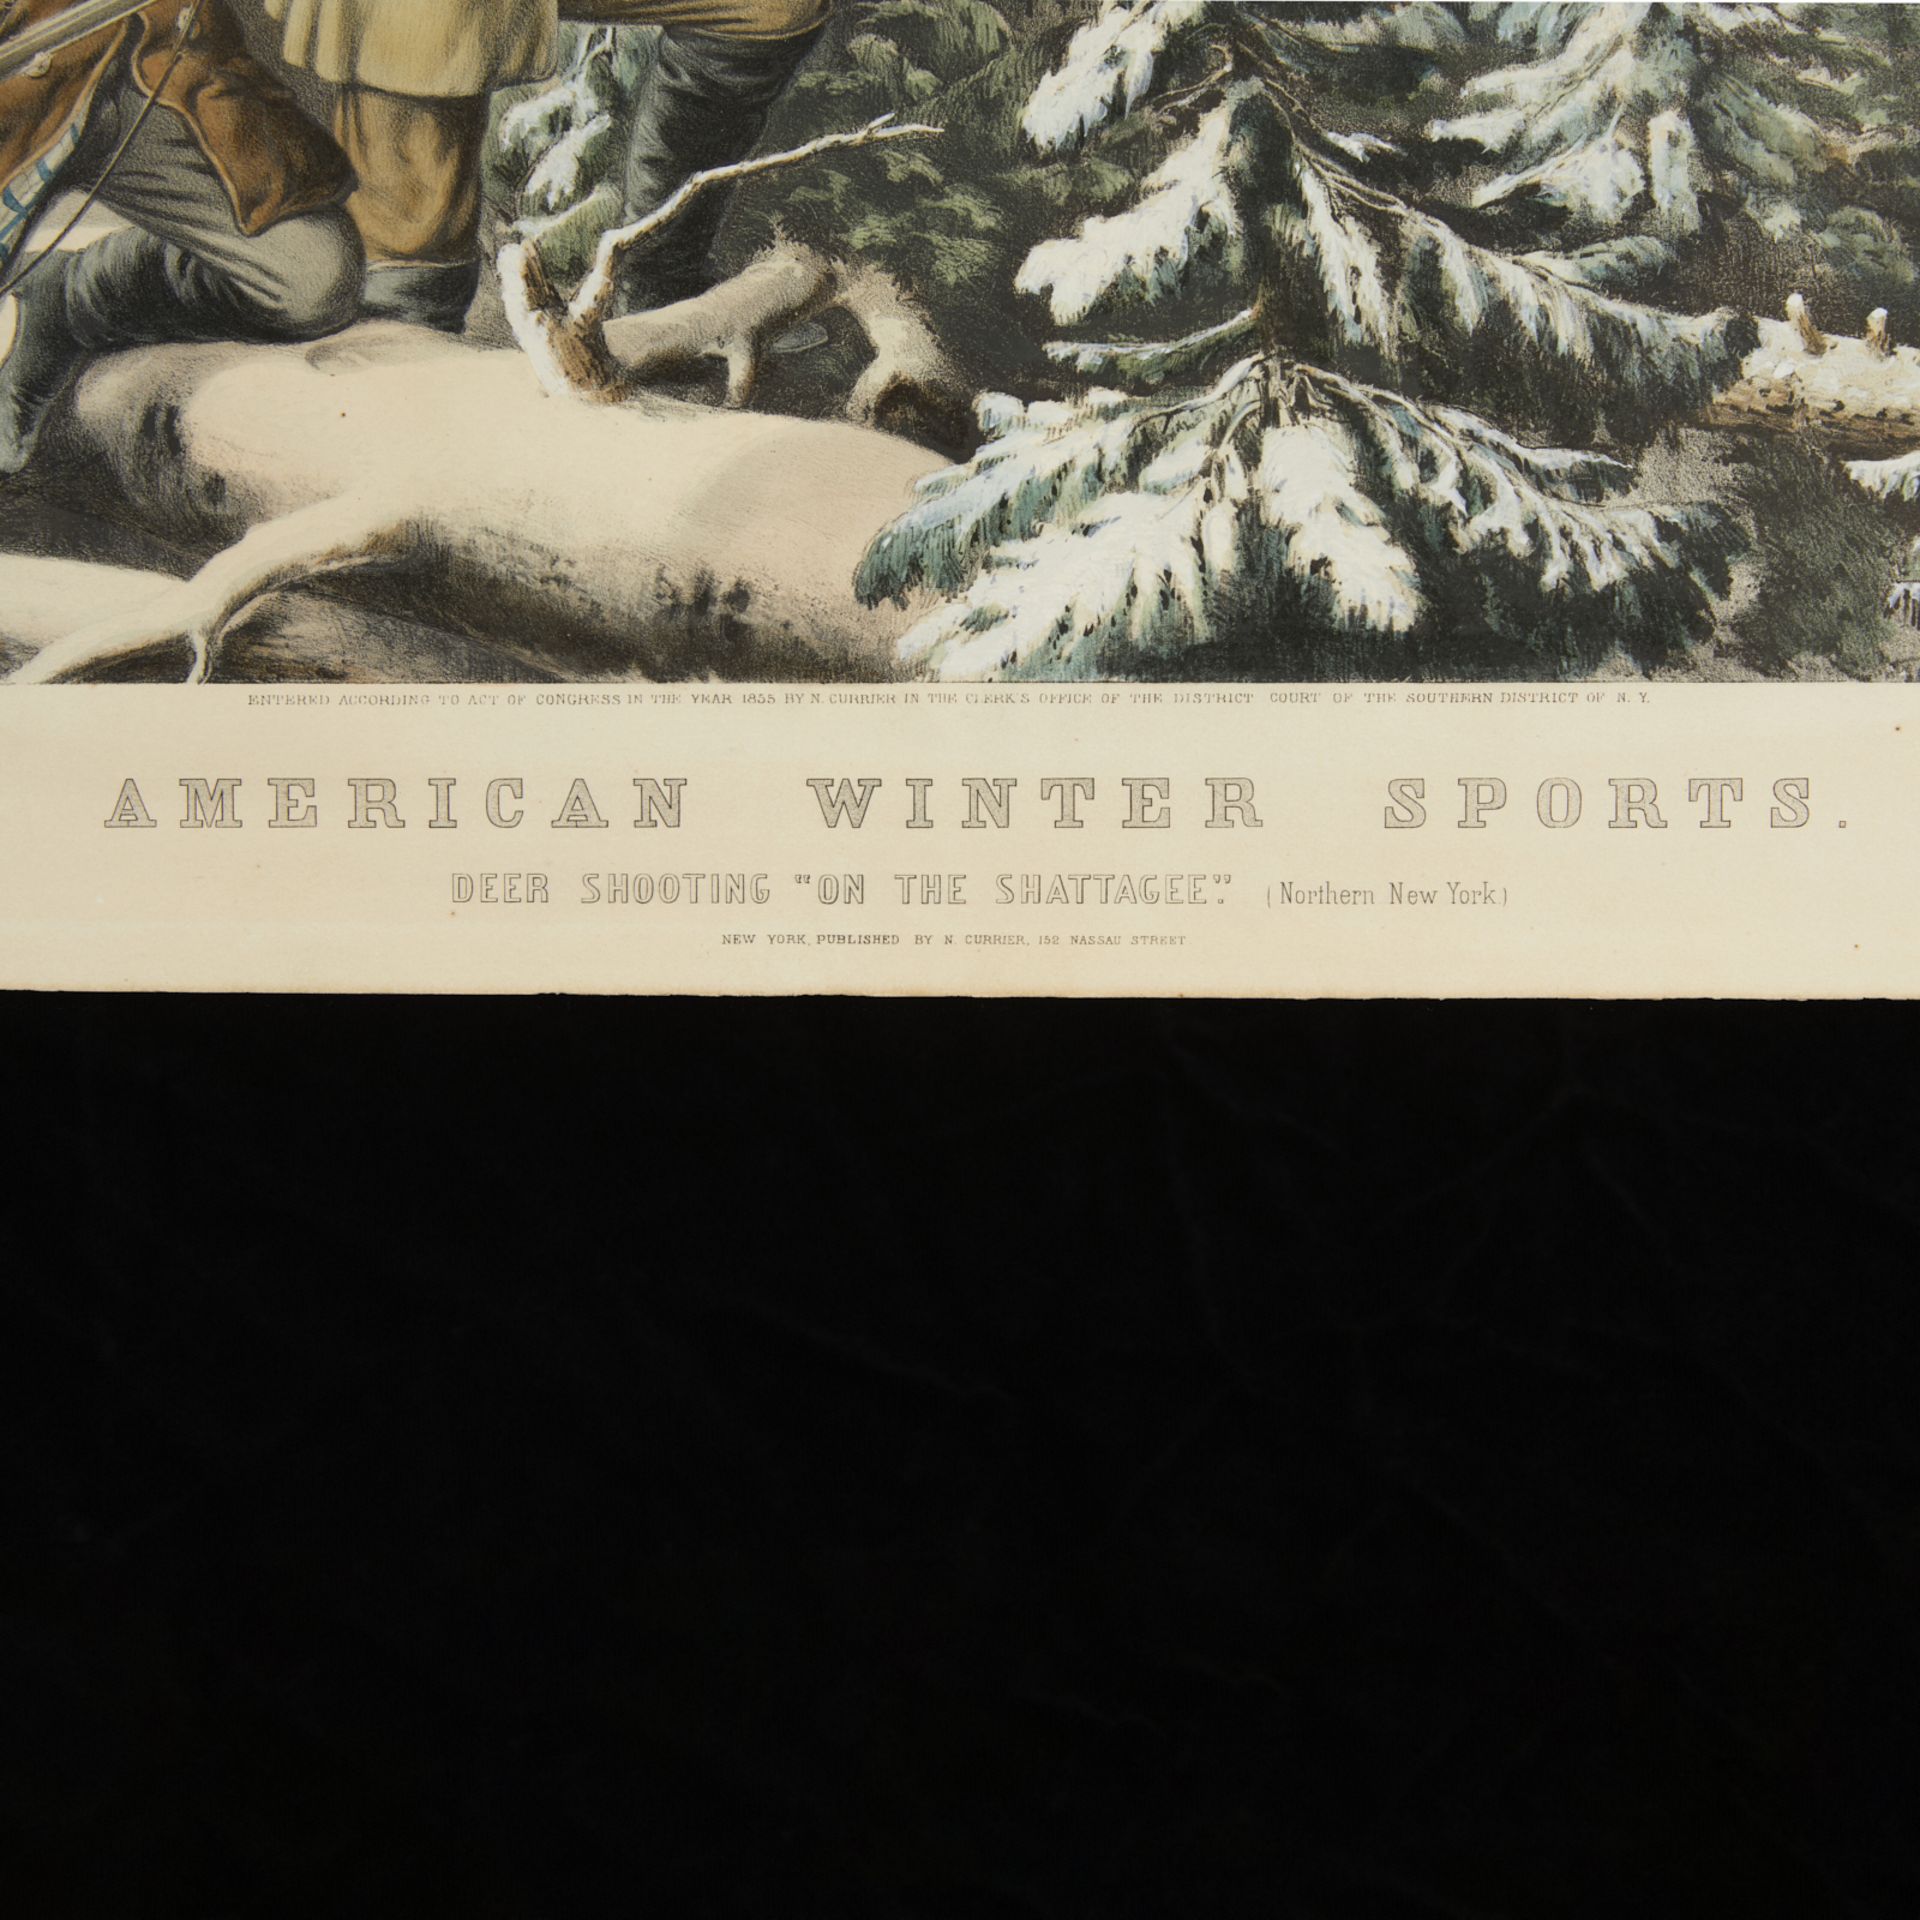 Currier & Ives "Am. Winter Sports: Deer Shooting" - Image 2 of 8